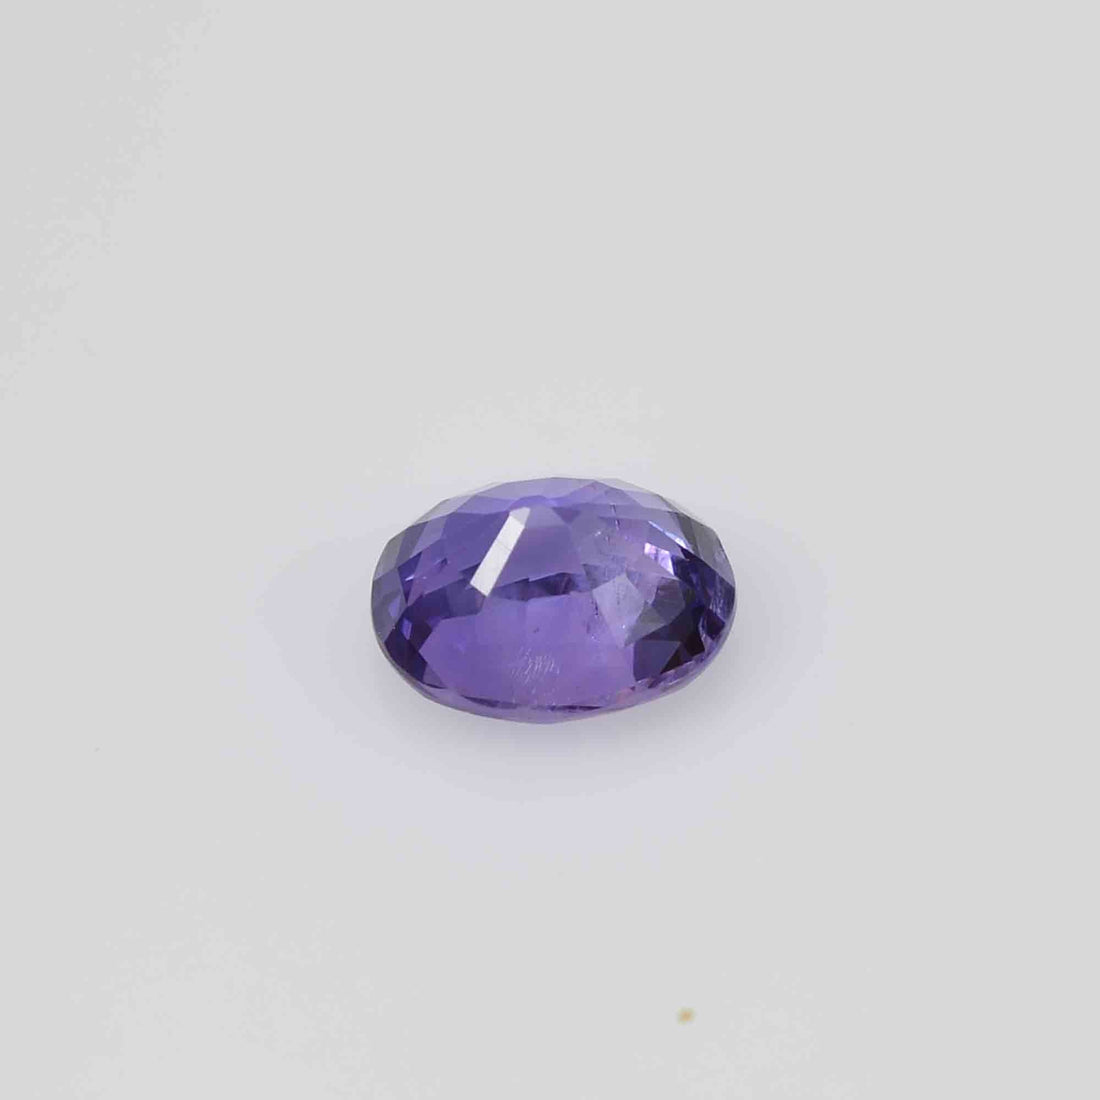 1.04 cts Natural Purple Sapphire Loose Gemstone Oval Cut